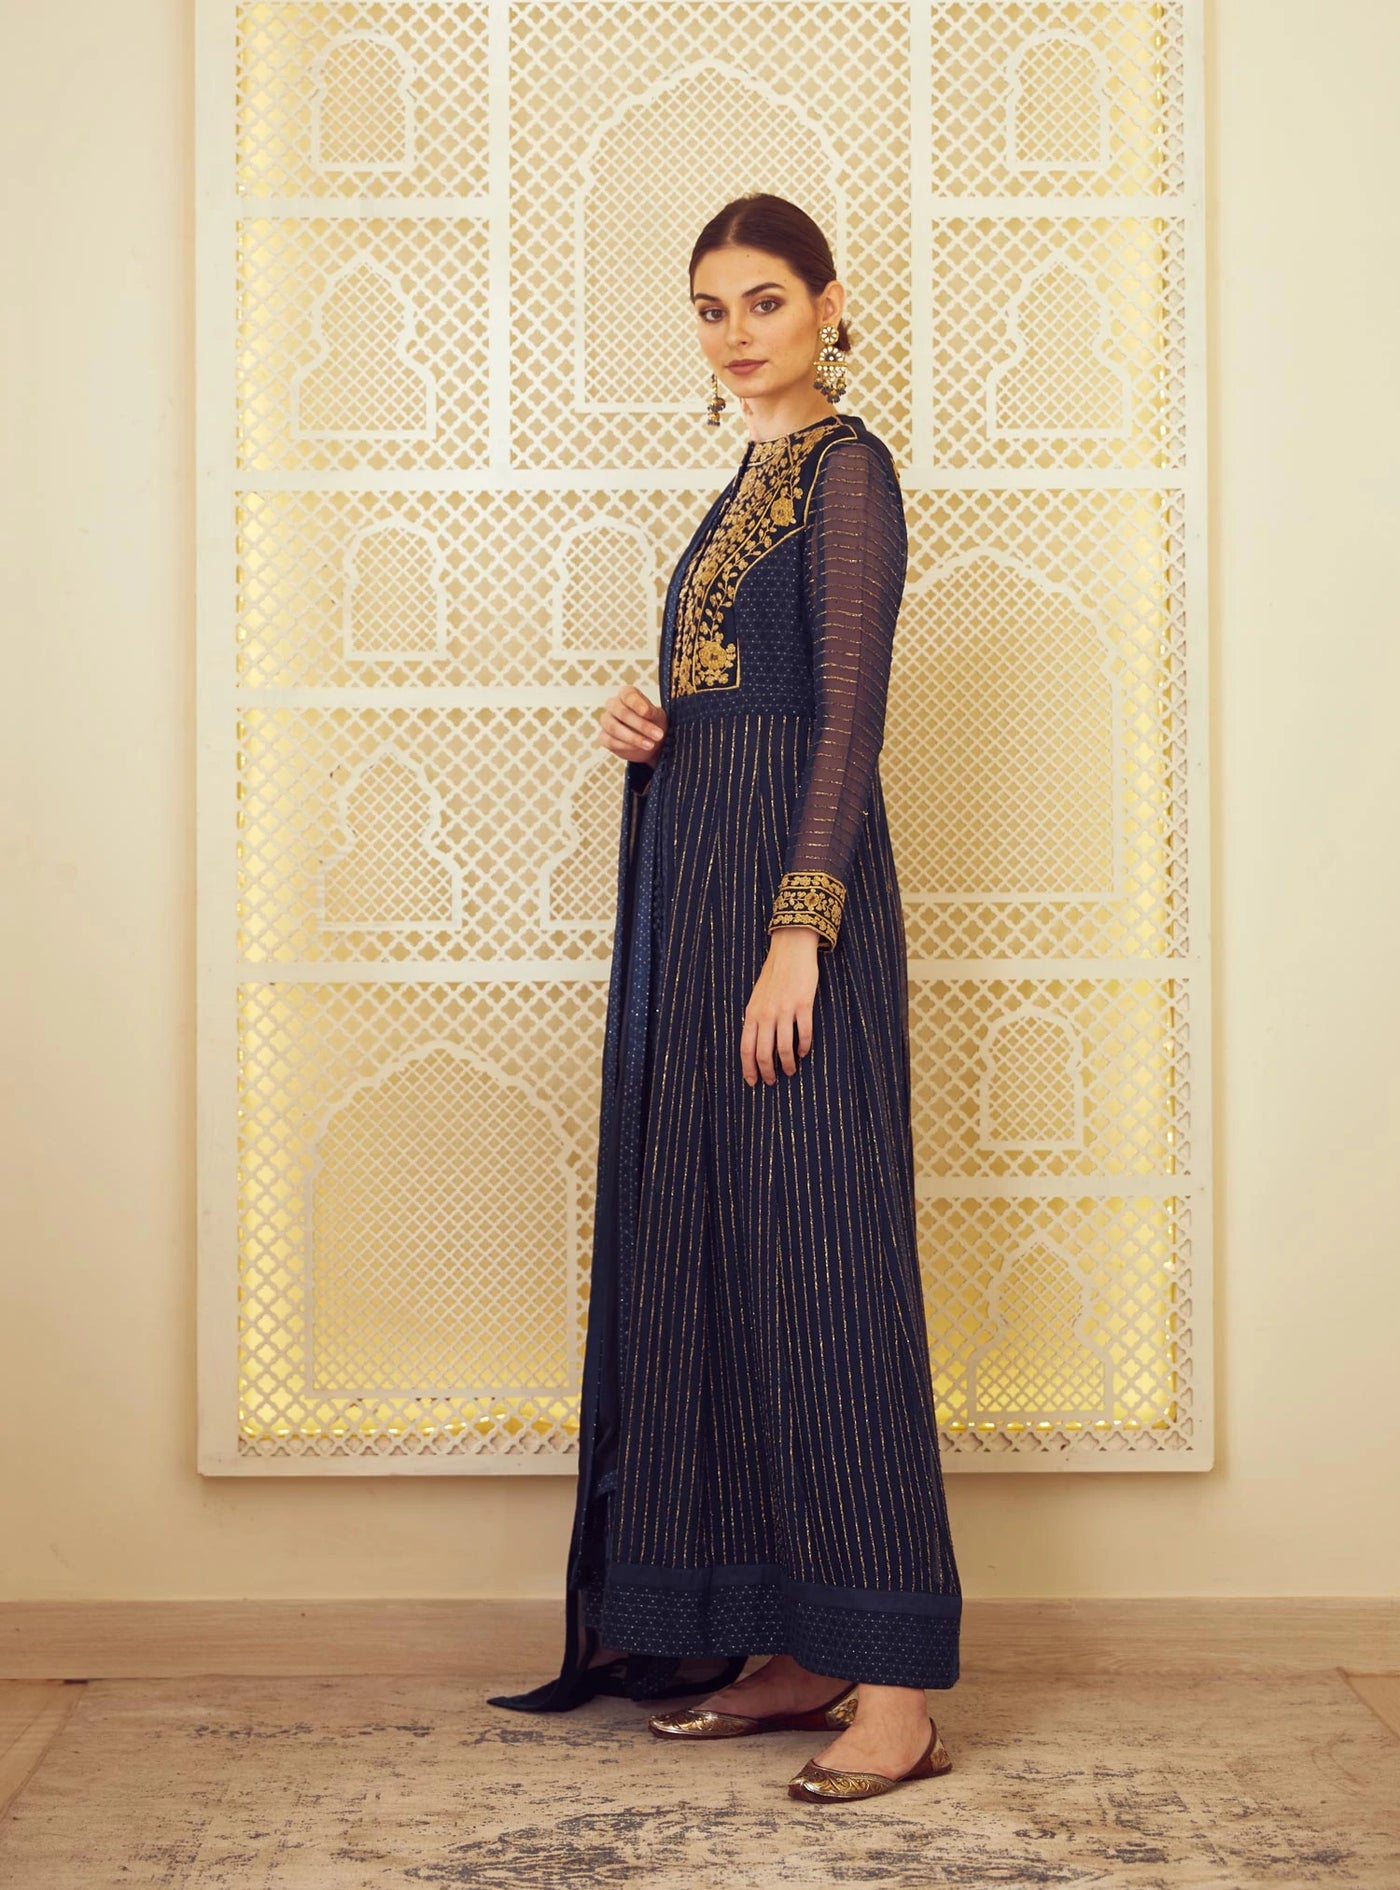 Navy Blue Anarkali Set Indian Clothing in Denver, CO, Aurora, CO, Boulder, CO, Fort Collins, CO, Colorado Springs, CO, Parker, CO, Highlands Ranch, CO, Cherry Creek, CO, Centennial, CO, and Longmont, CO. NATIONWIDE SHIPPING USA- India Fashion X